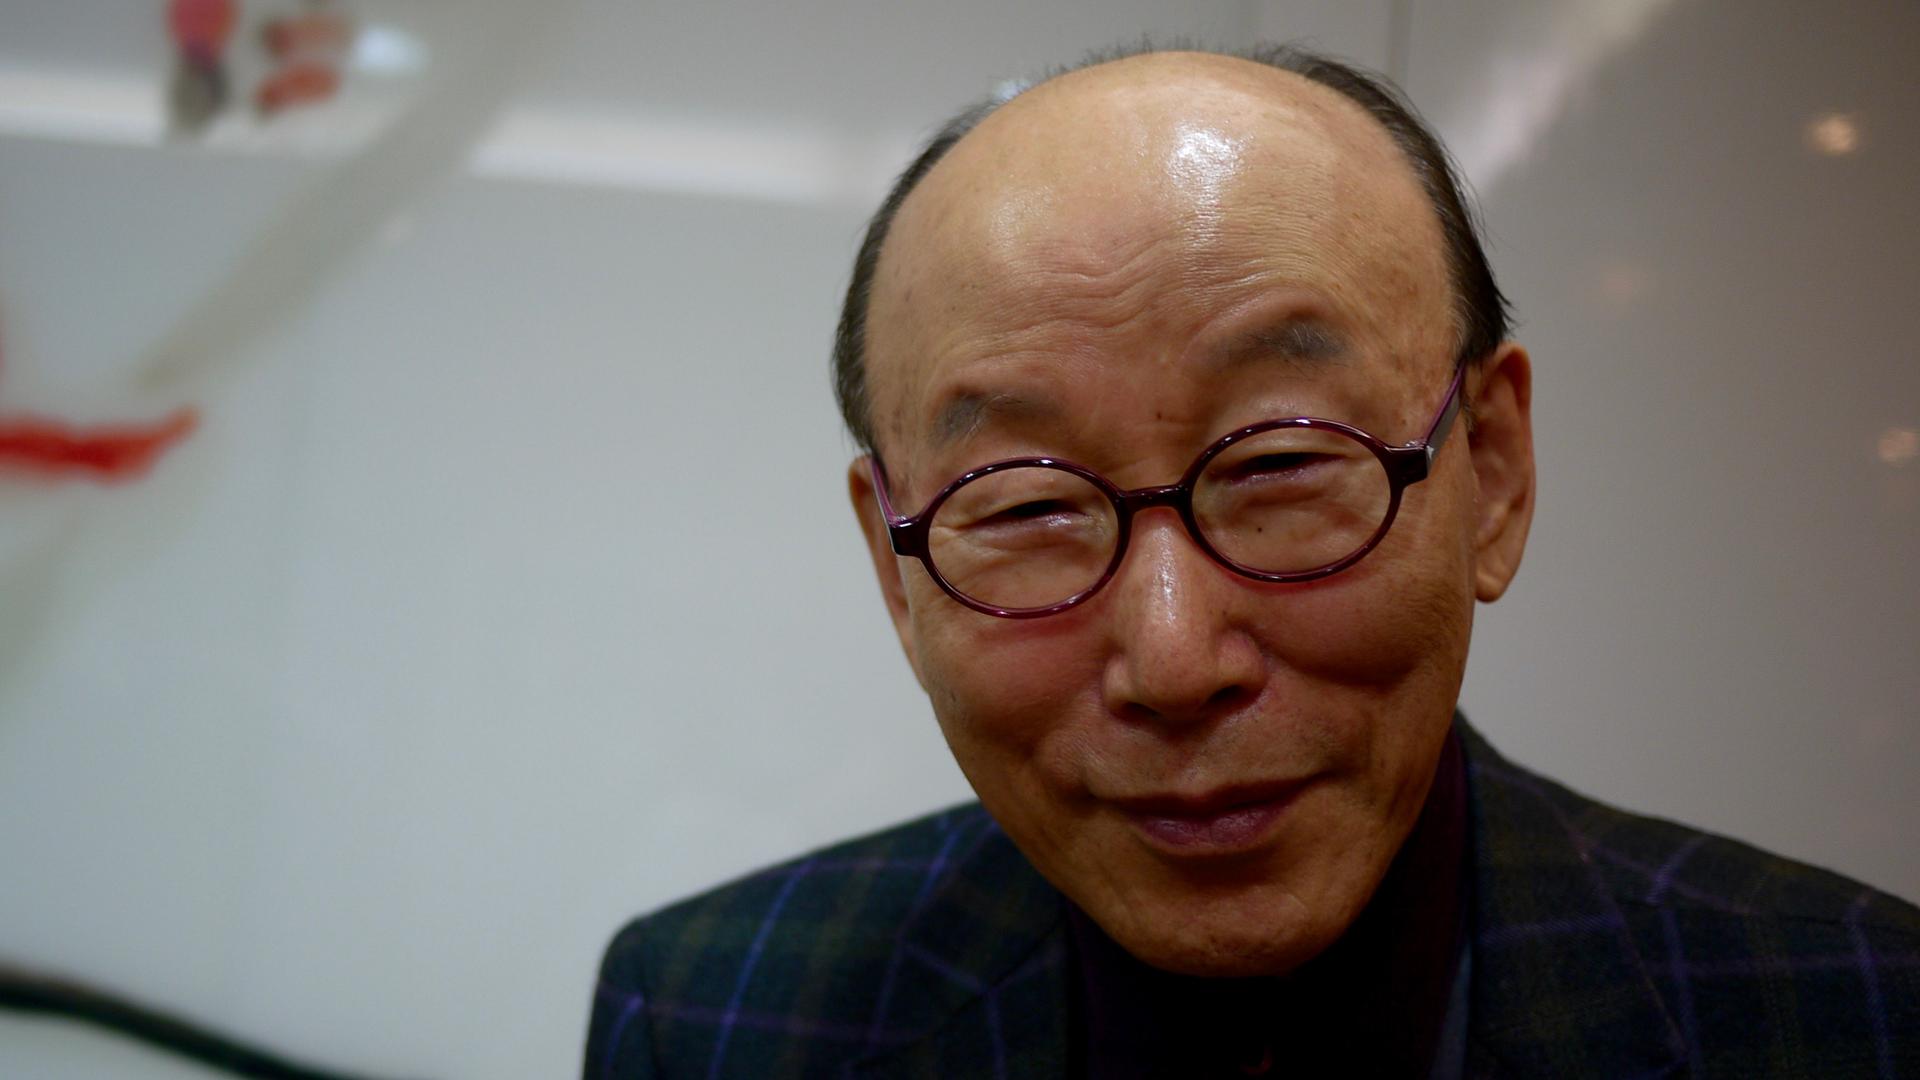 Yong-gi Cho converted to Christianity as a teenager soon after the Korean War. He says faith in Jesus saved him from malnutrition and illness. He's retired as the head of Yoido Full Gospel Church, but is well-known in South Korea.